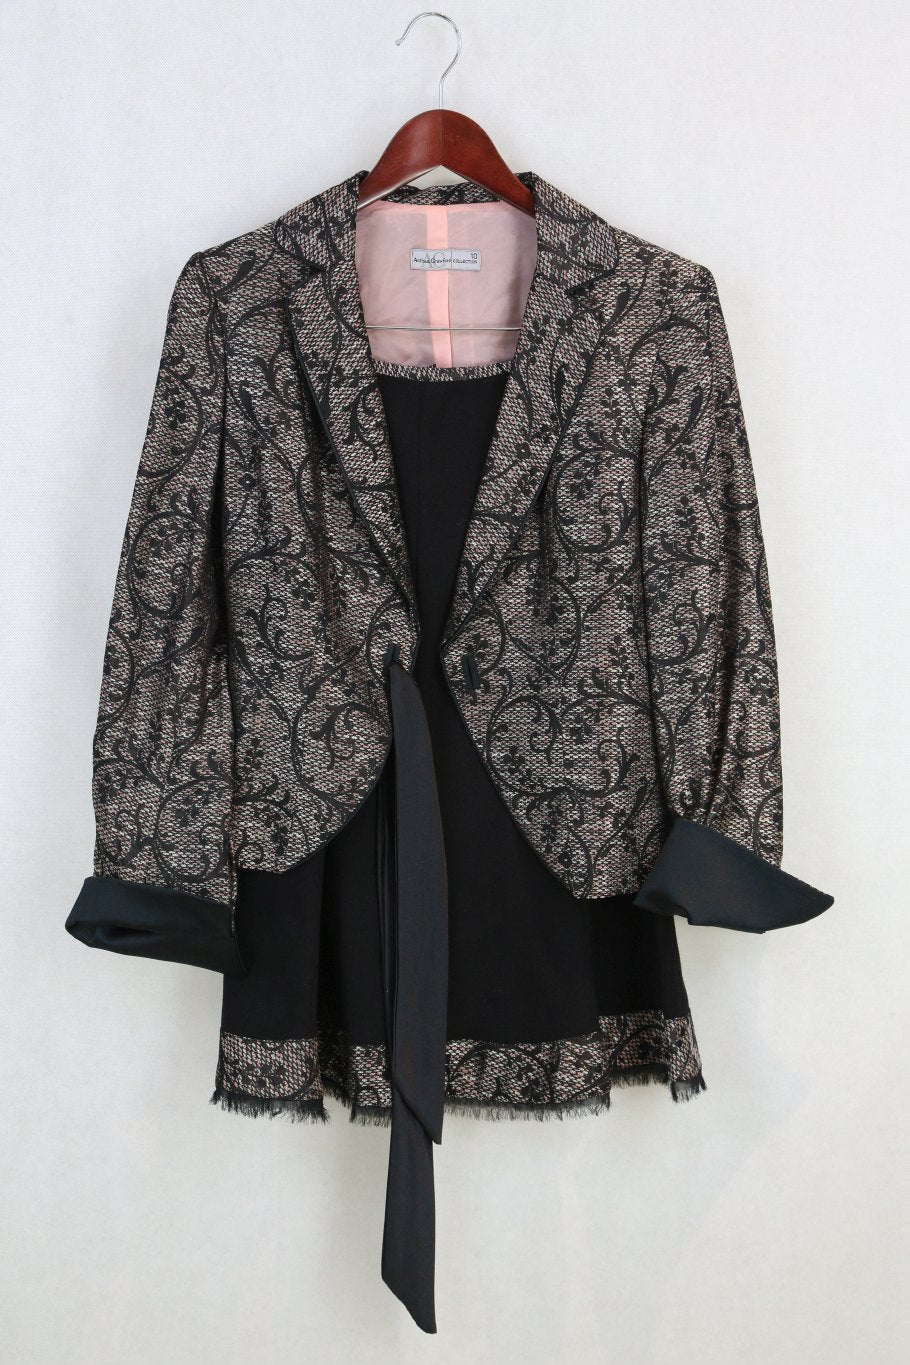 Anthea Crawford Suit (Skirt and Jacket)